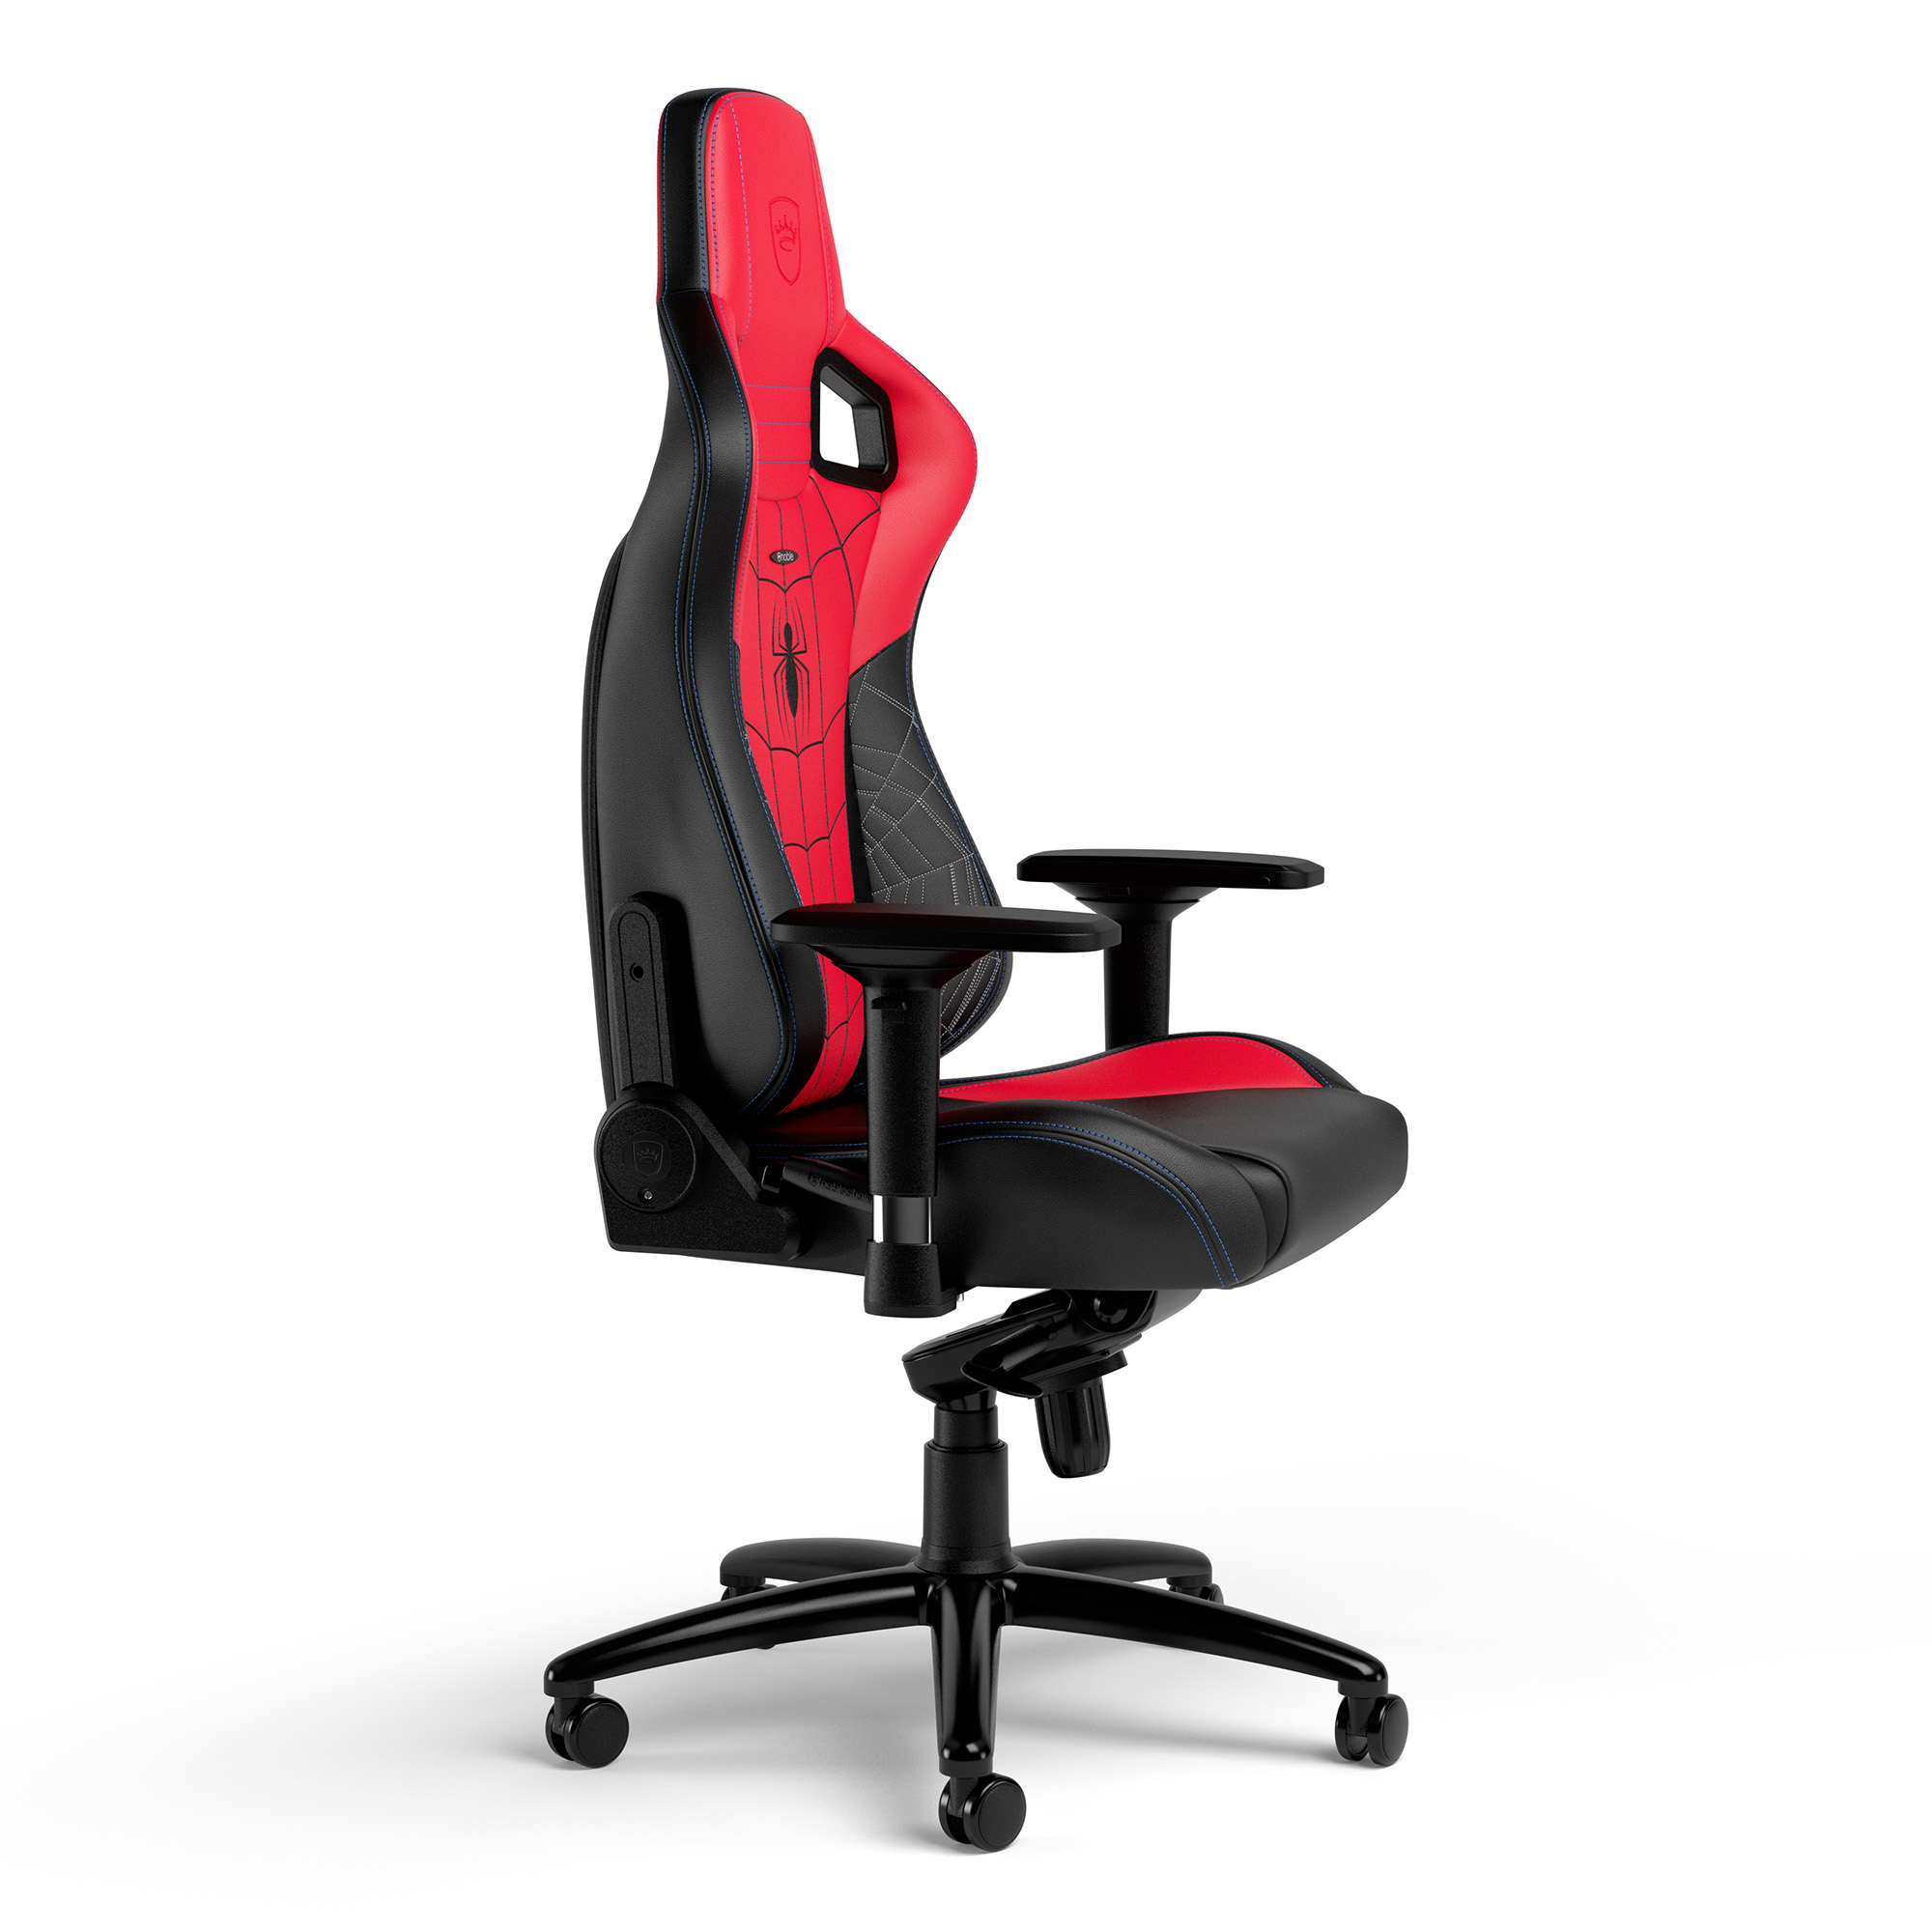 noblechairs - noblechairs EPIC Gaming Chair - Spider-Man Edition